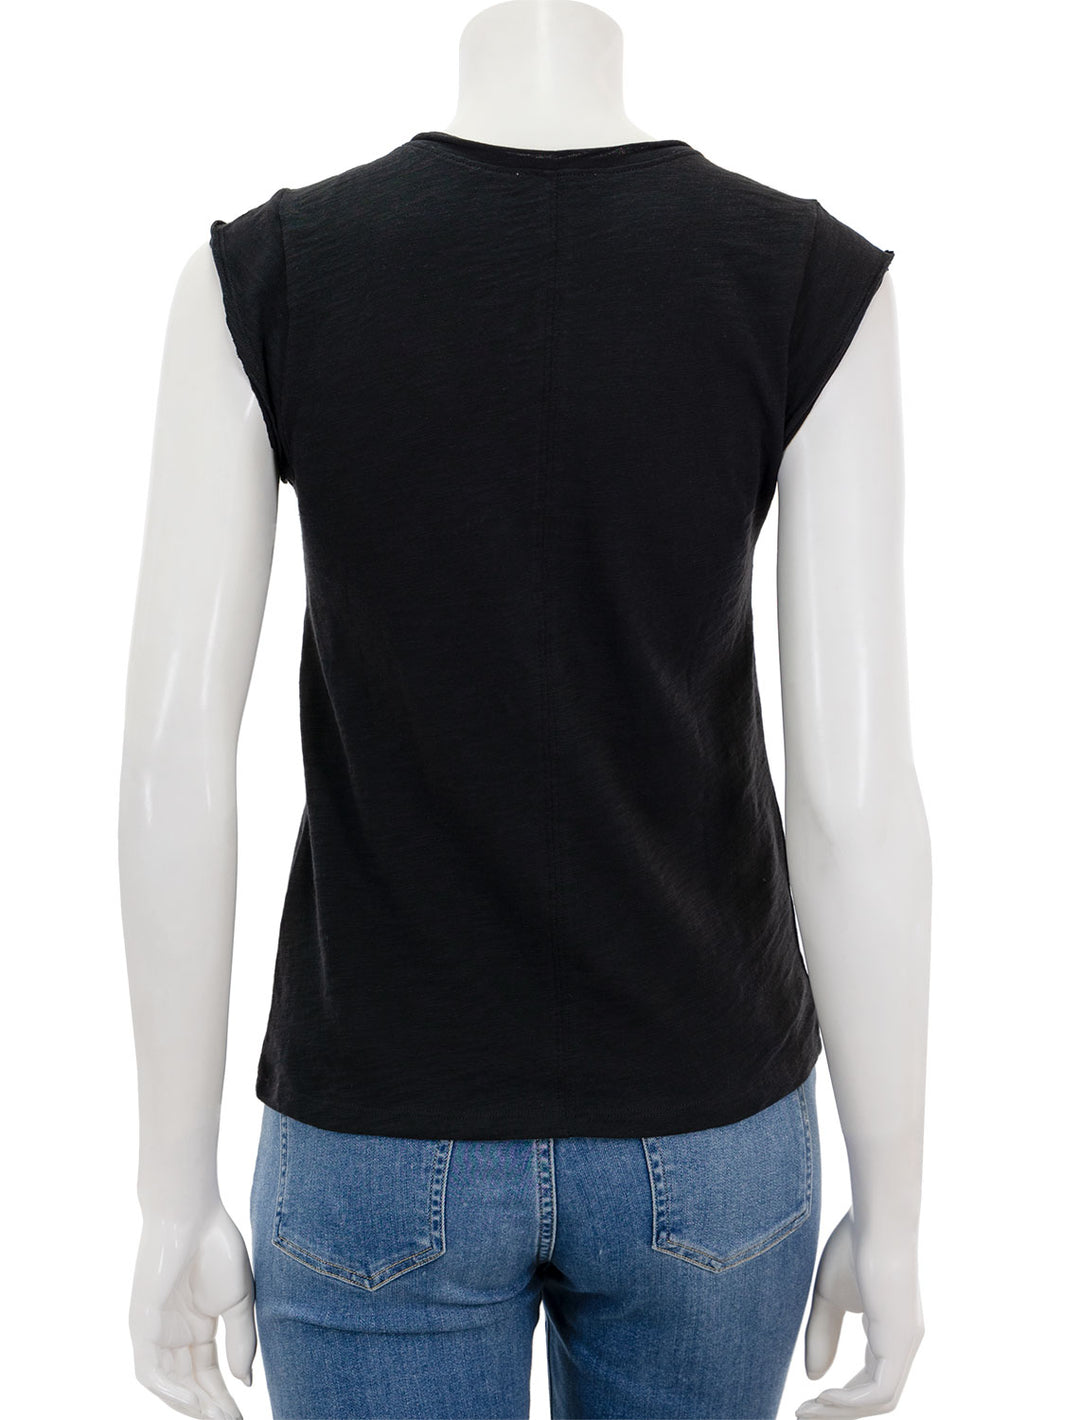 Back view of Lilla P.'s cap sleeve v neck tee in black.